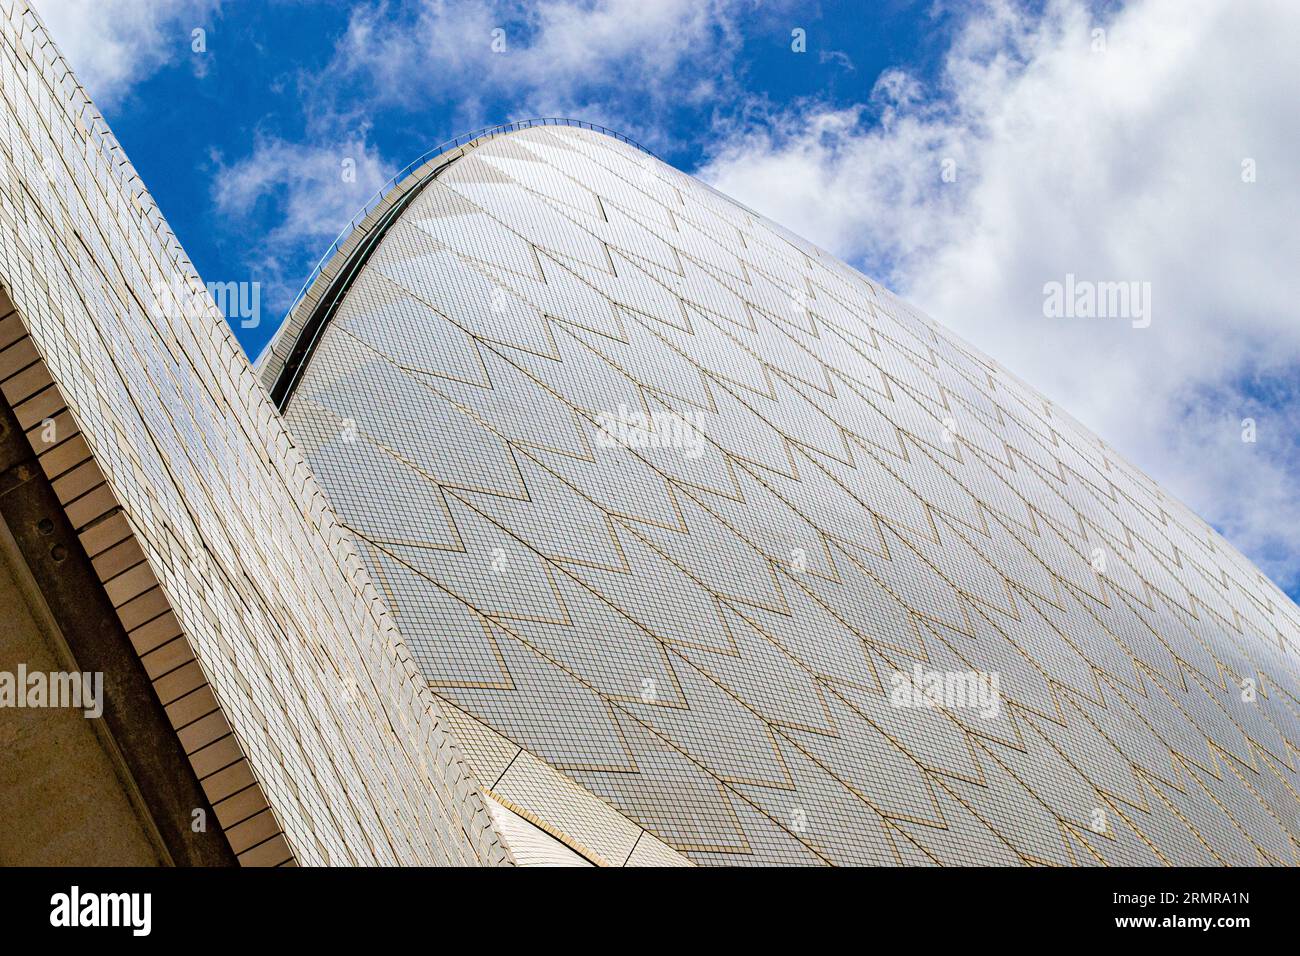 Close up of the vast number of glossy tiles covering the Sydney Opera House, showing the intricate detail of the tiles Stock Photo